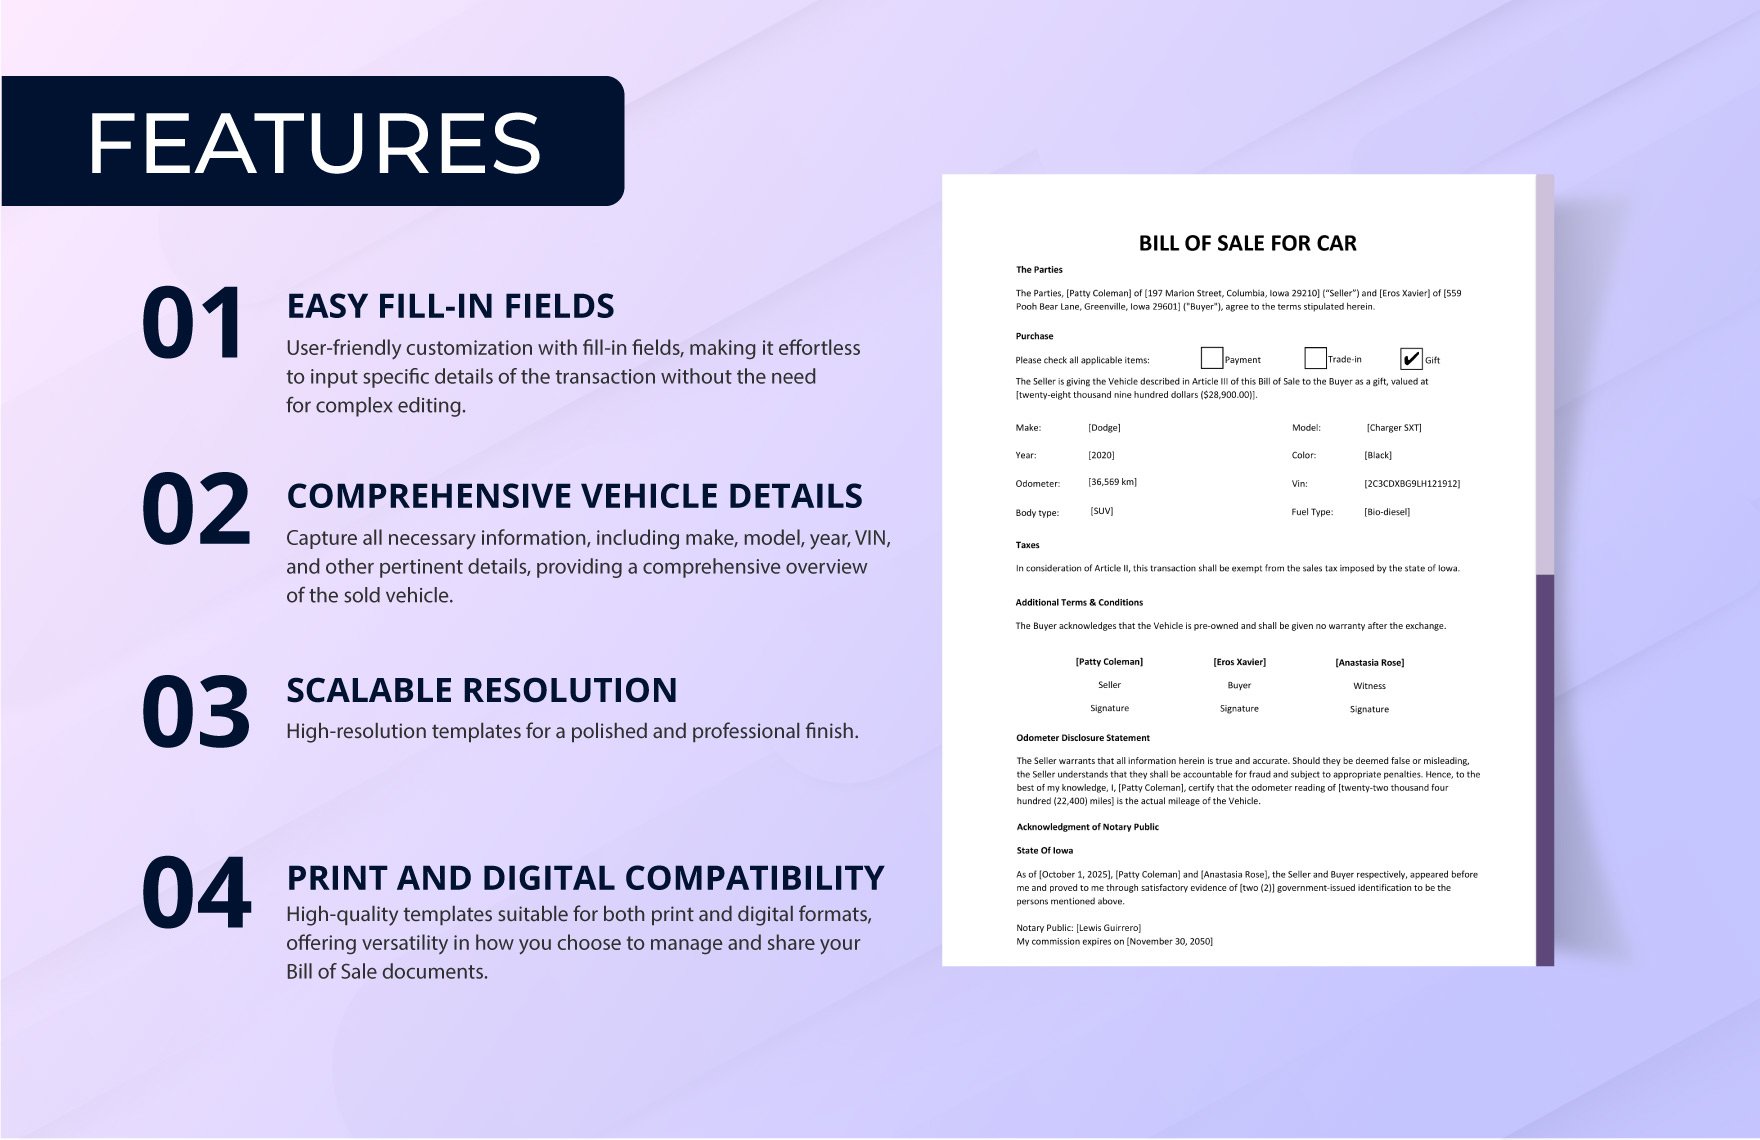 Bill of Sale For Car Template